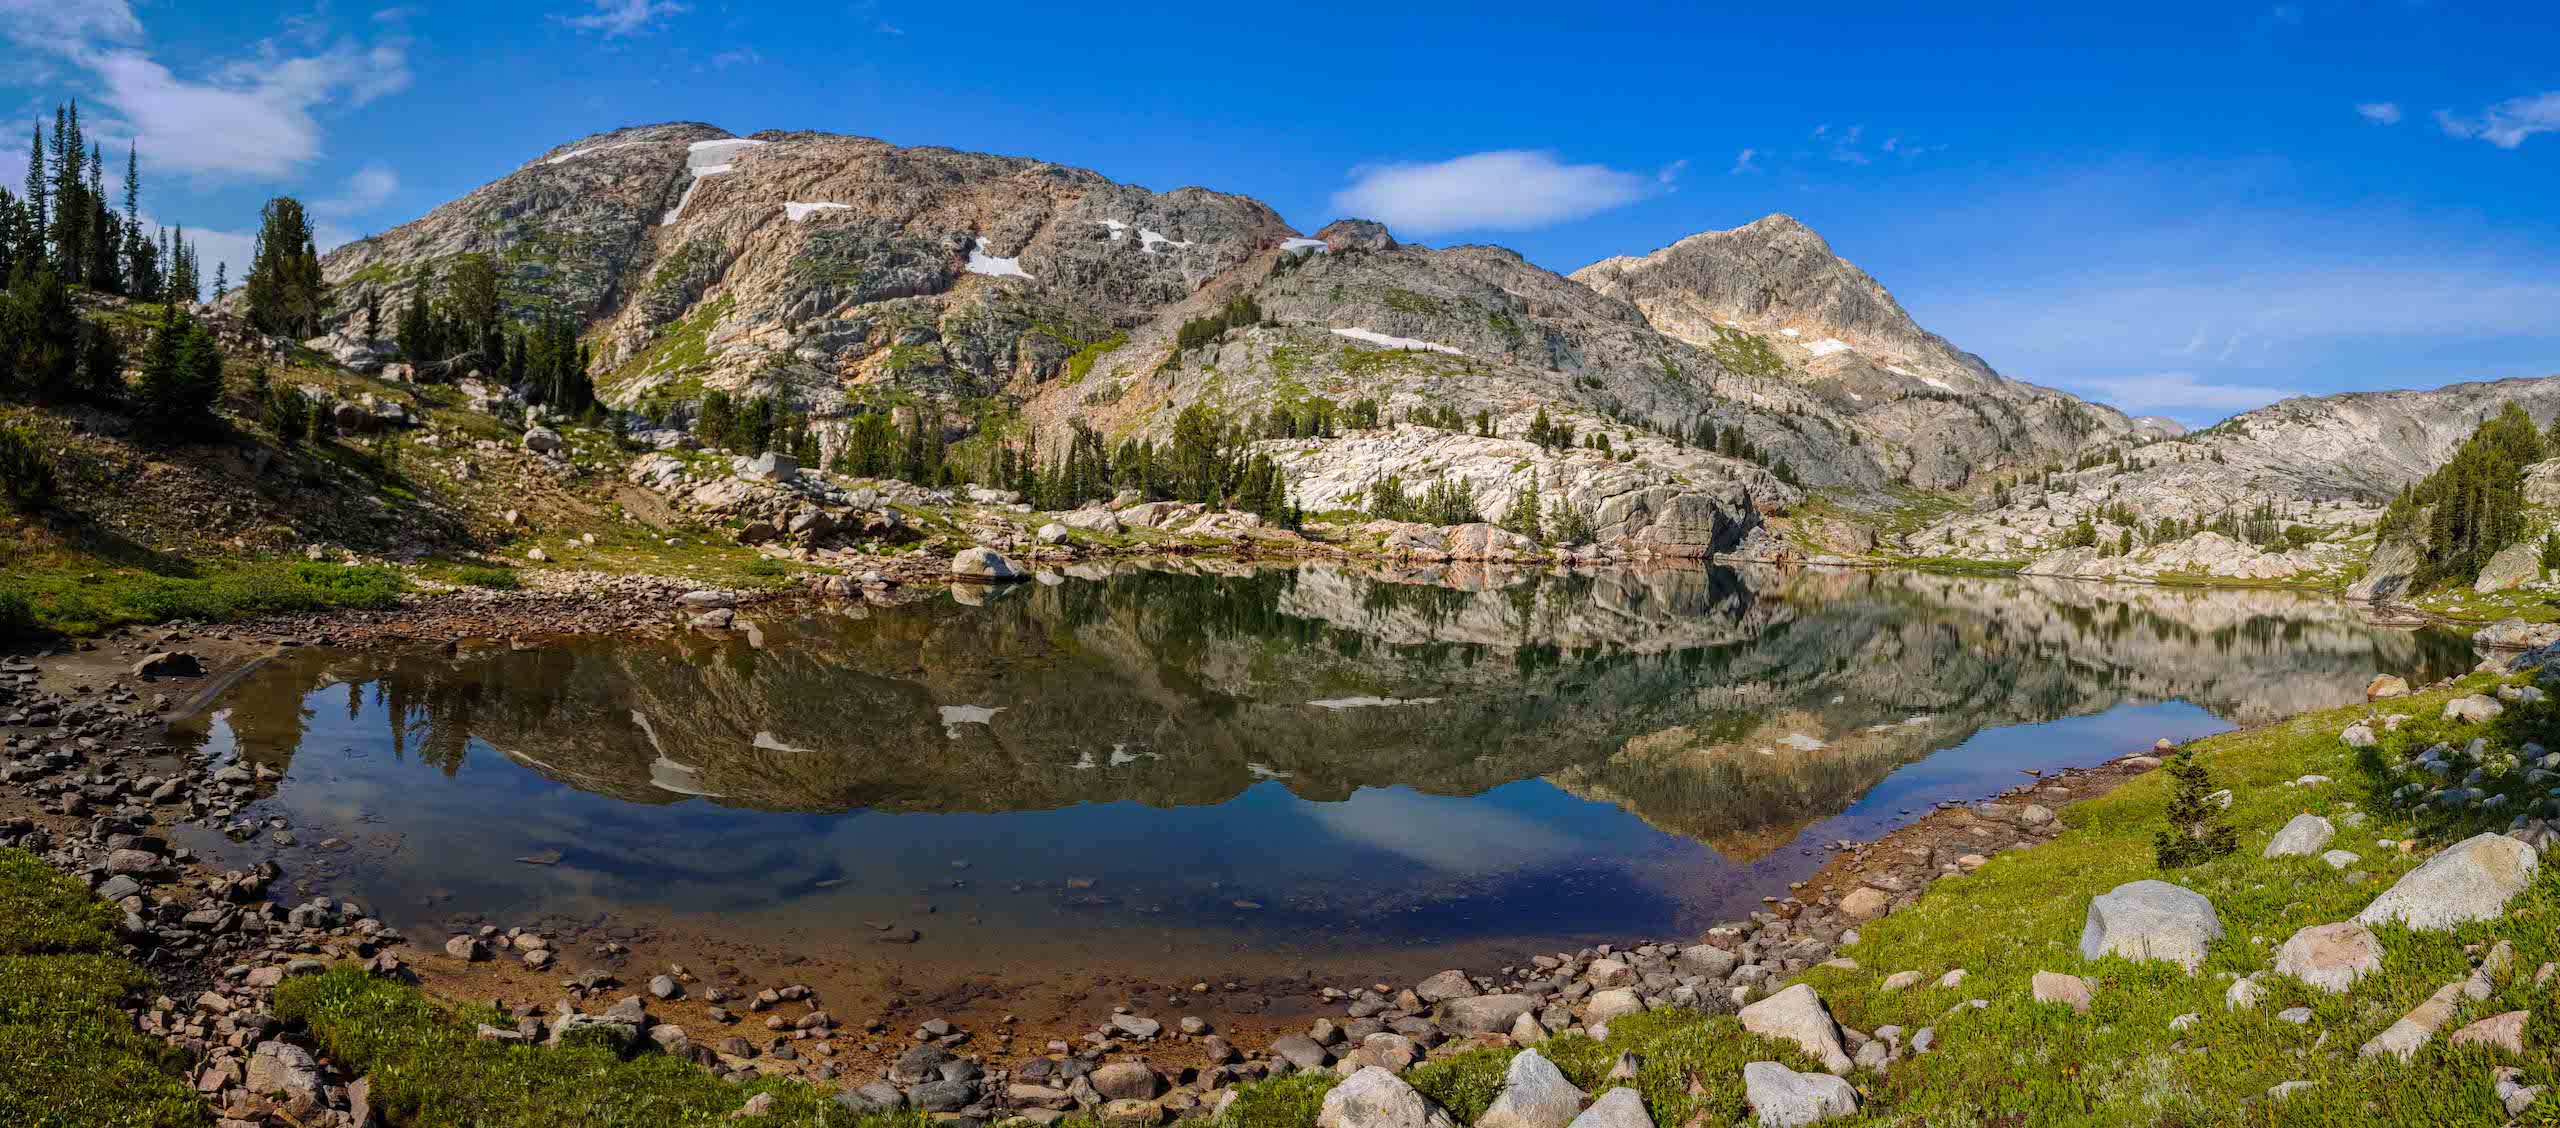 Ollie Lake in Montana's Bear Tooth Mountains